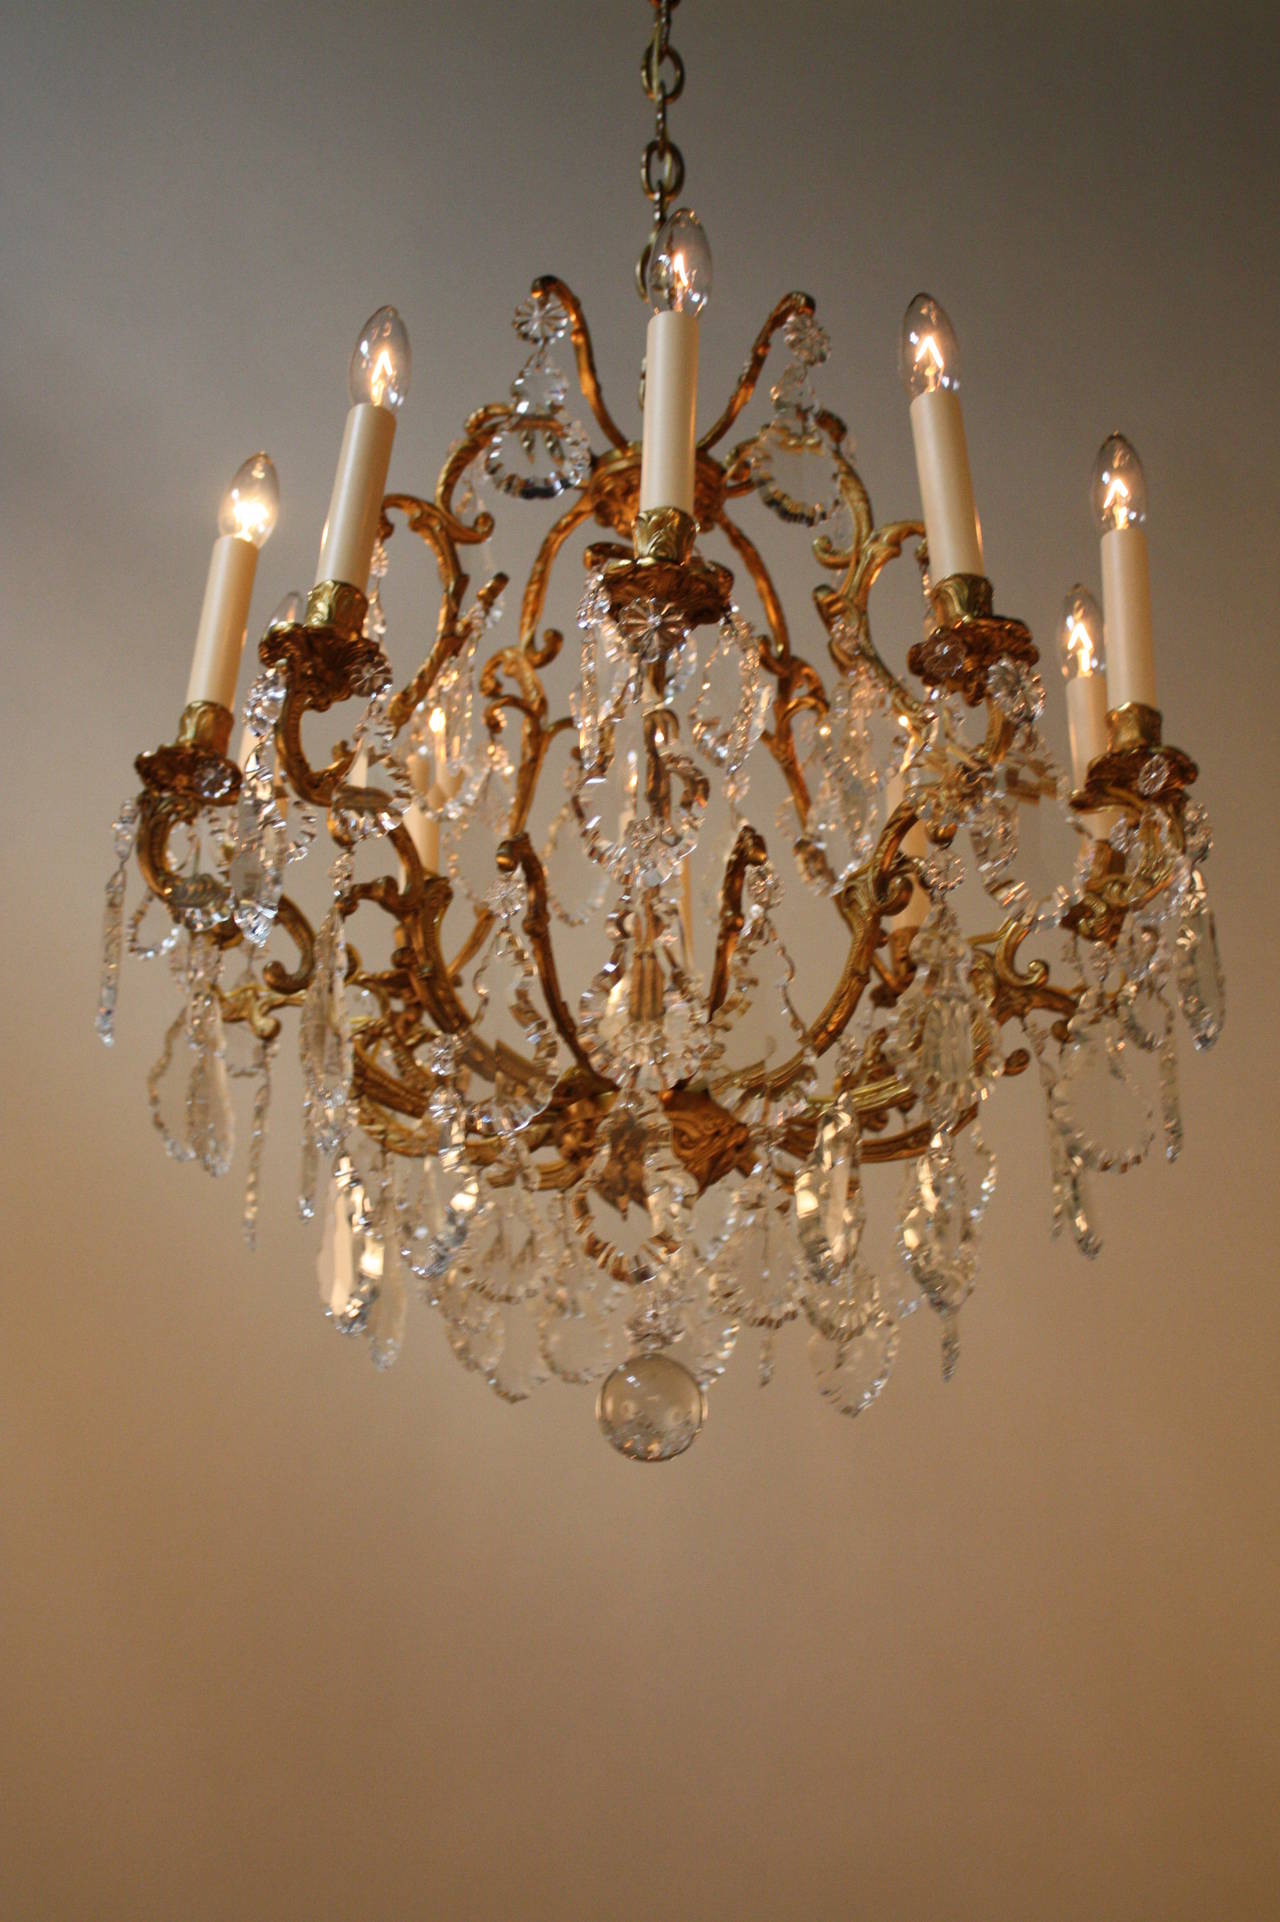 Beautiful ten-light crystal and bronze French chandelier.
This chandelier is 22